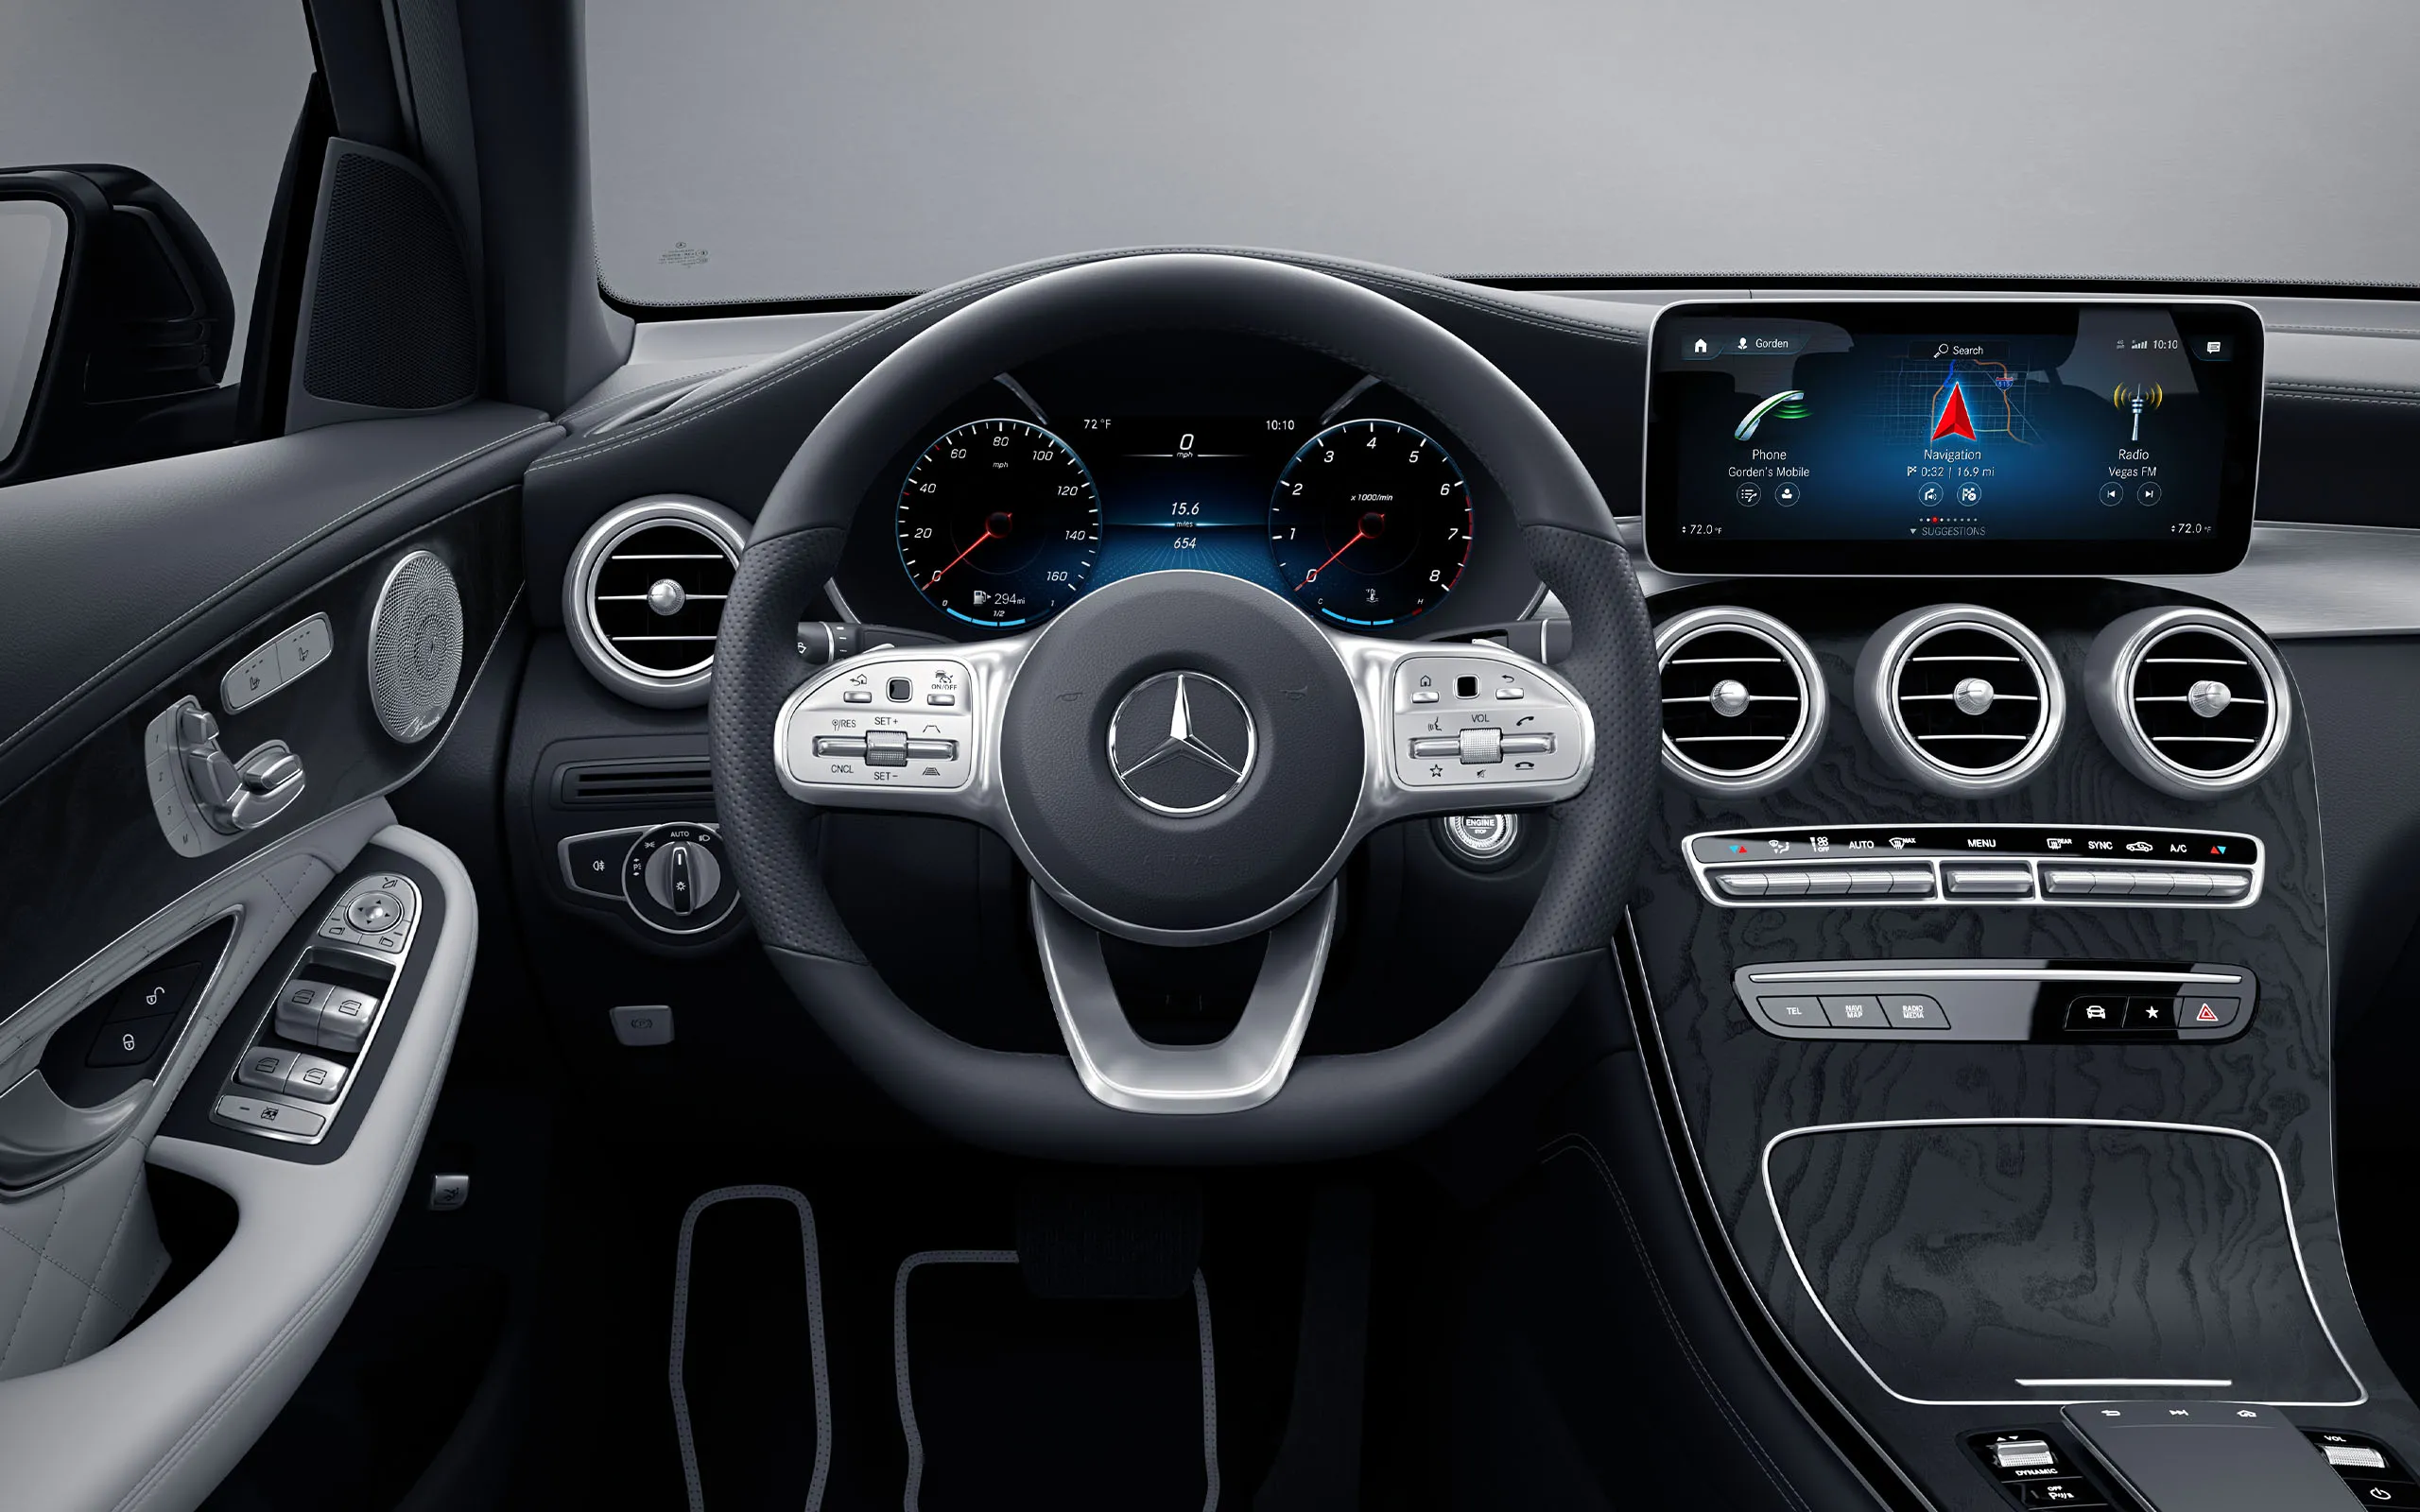 The Mid Size Glc Coupe Mercedes Benz Usa